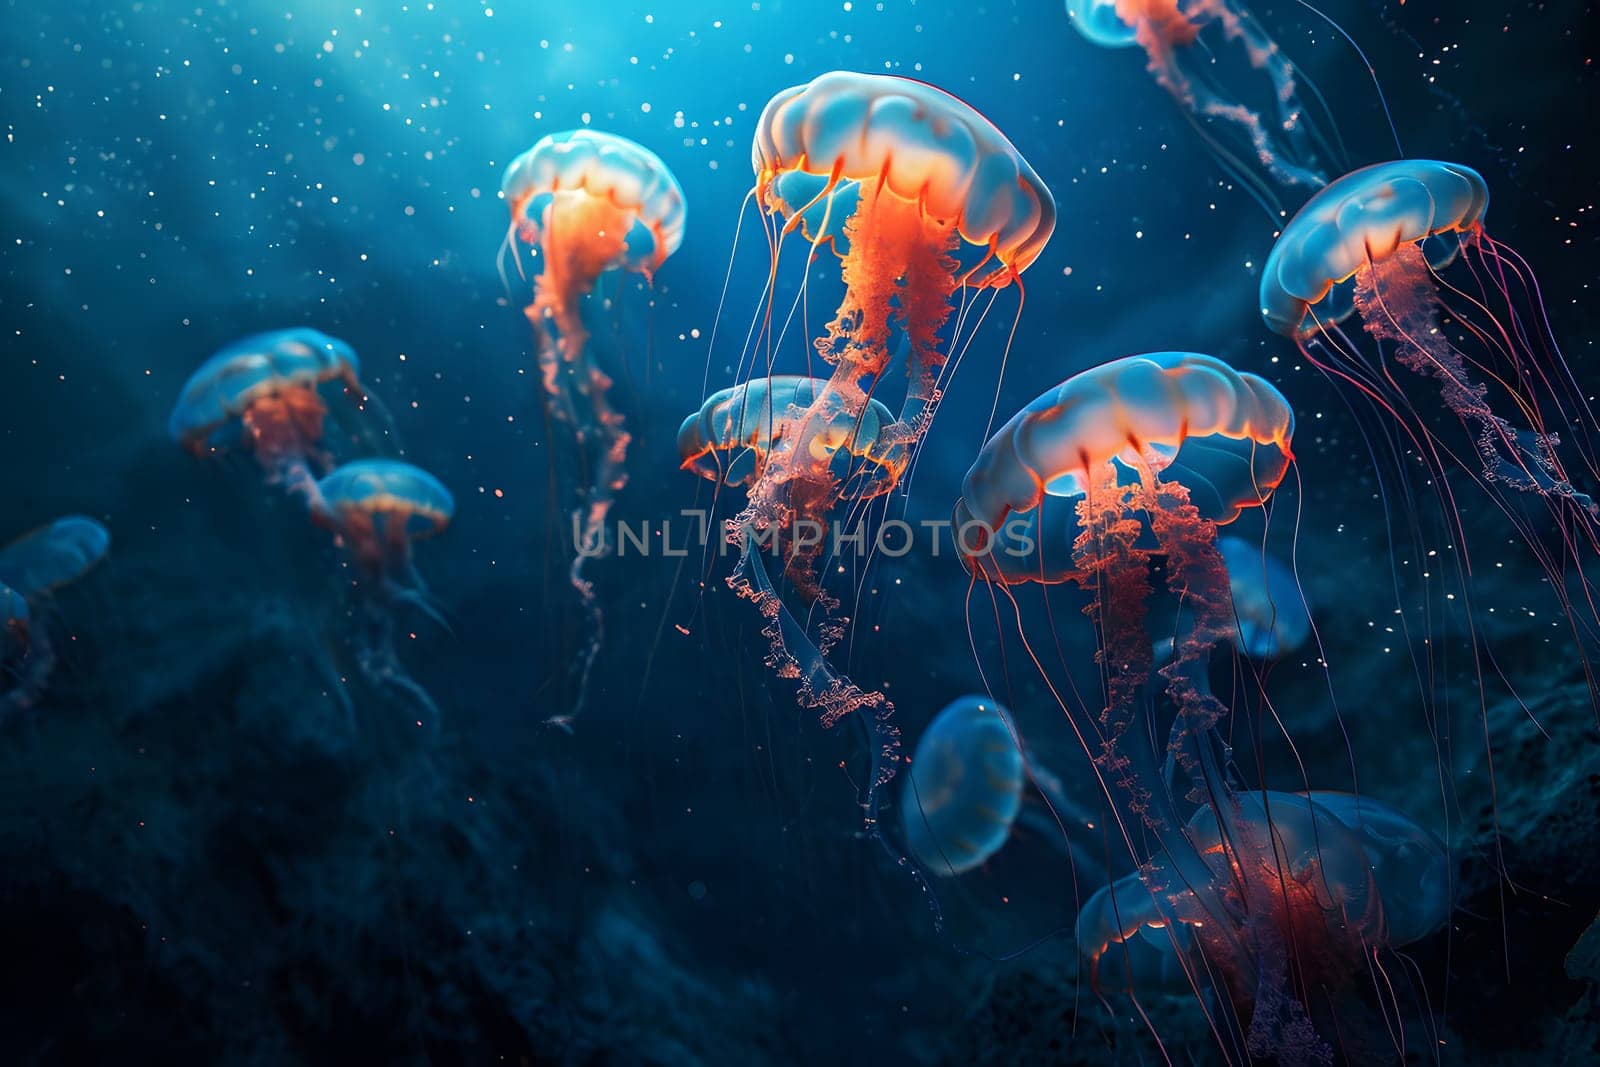 glowing sea jellyfishes on dark background, neural network generated image by z1b